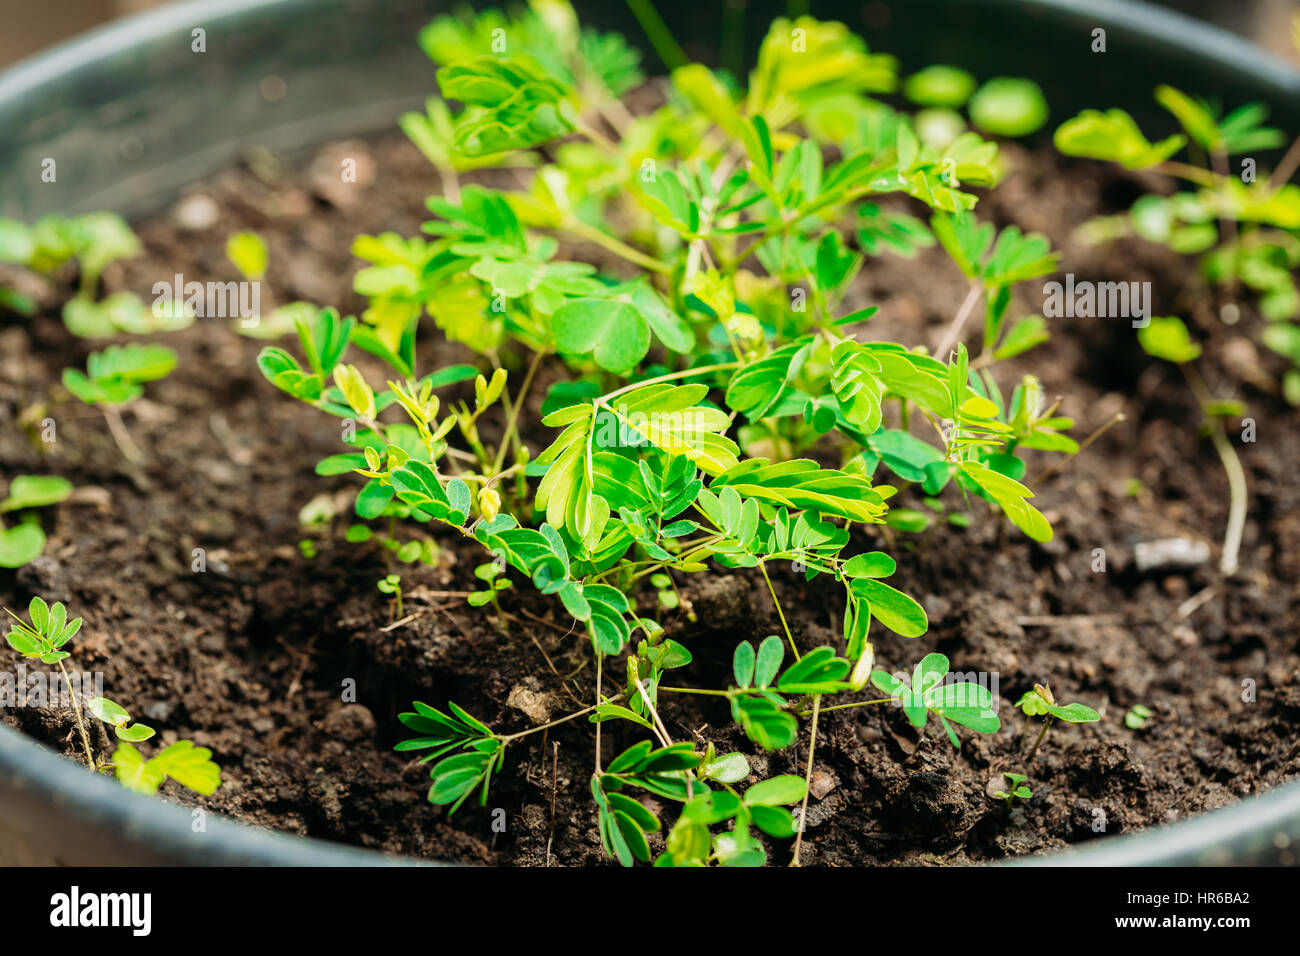 Small Green Sprouts Of Mimosa Pudica Growing From Soil In Pot In Greenhouse Or Hothouse. Mimosa Pudica Is A Sensitive Plant, Sleepy Plant, Dormilones, Stock Photo